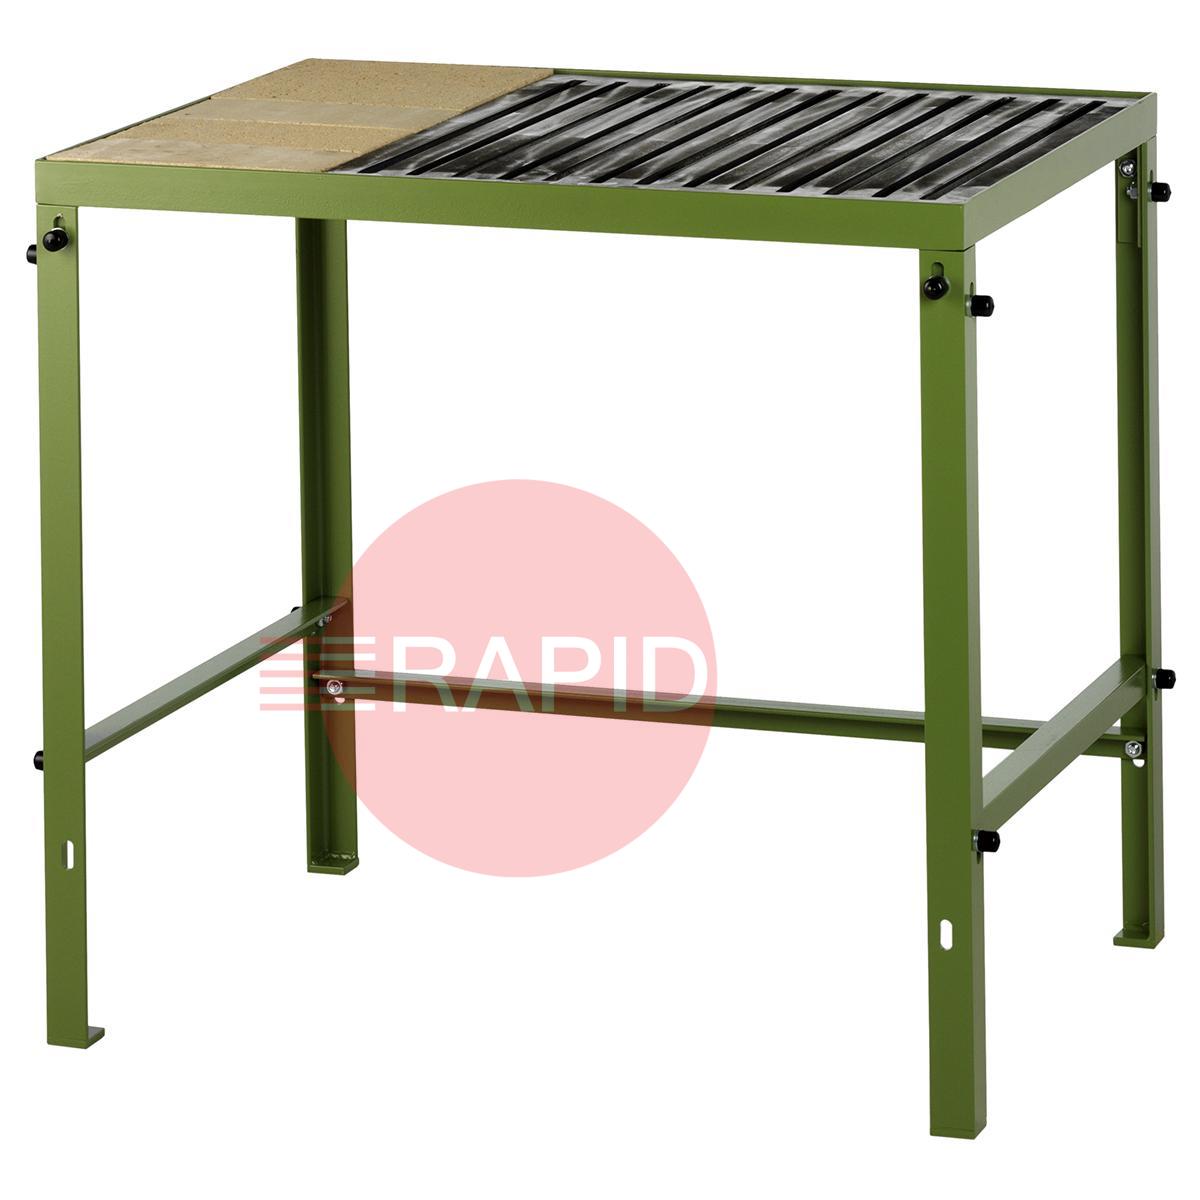 45.41.01.6311  CEPRO Welding Table with Metal Grill and Fire Proof Brick, H - 80cm x D - 63cm x L - 110cm